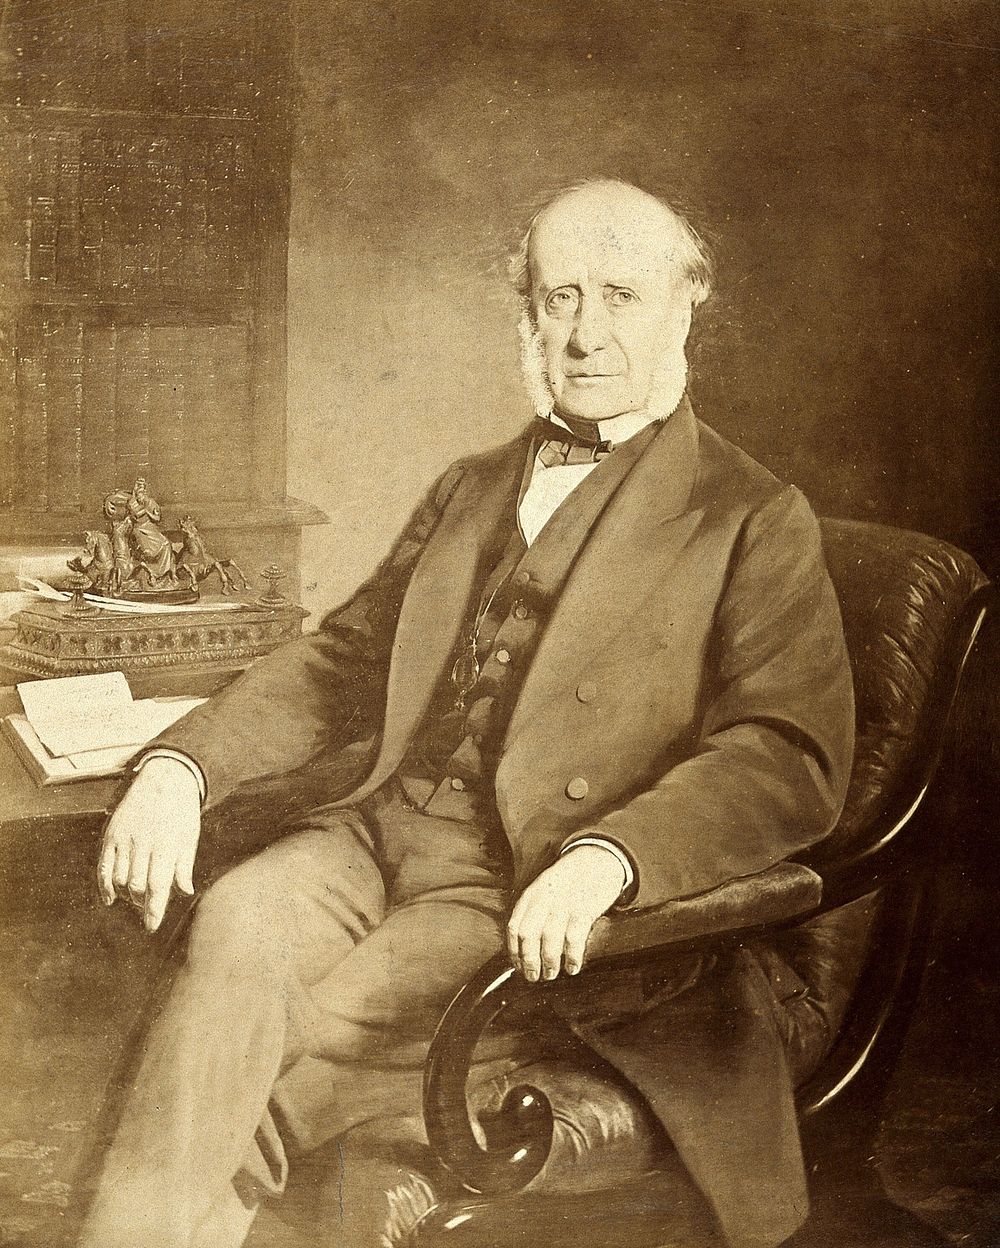 G.F. Evans. Photograph by R.W. Thrupp after a painting.